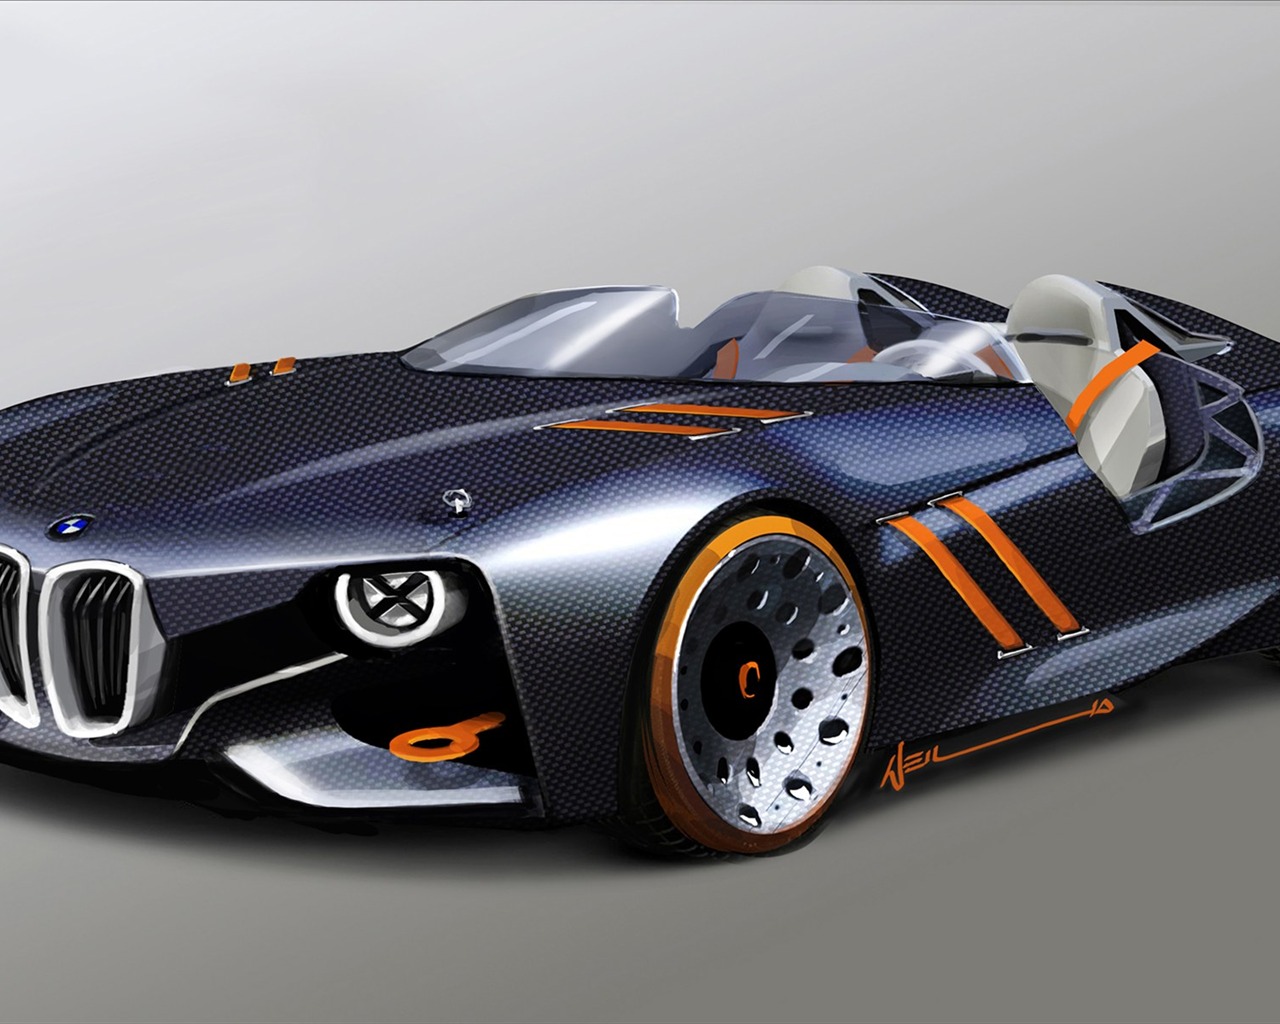 Special edition of concept cars wallpaper (23) #1 - 1280x1024